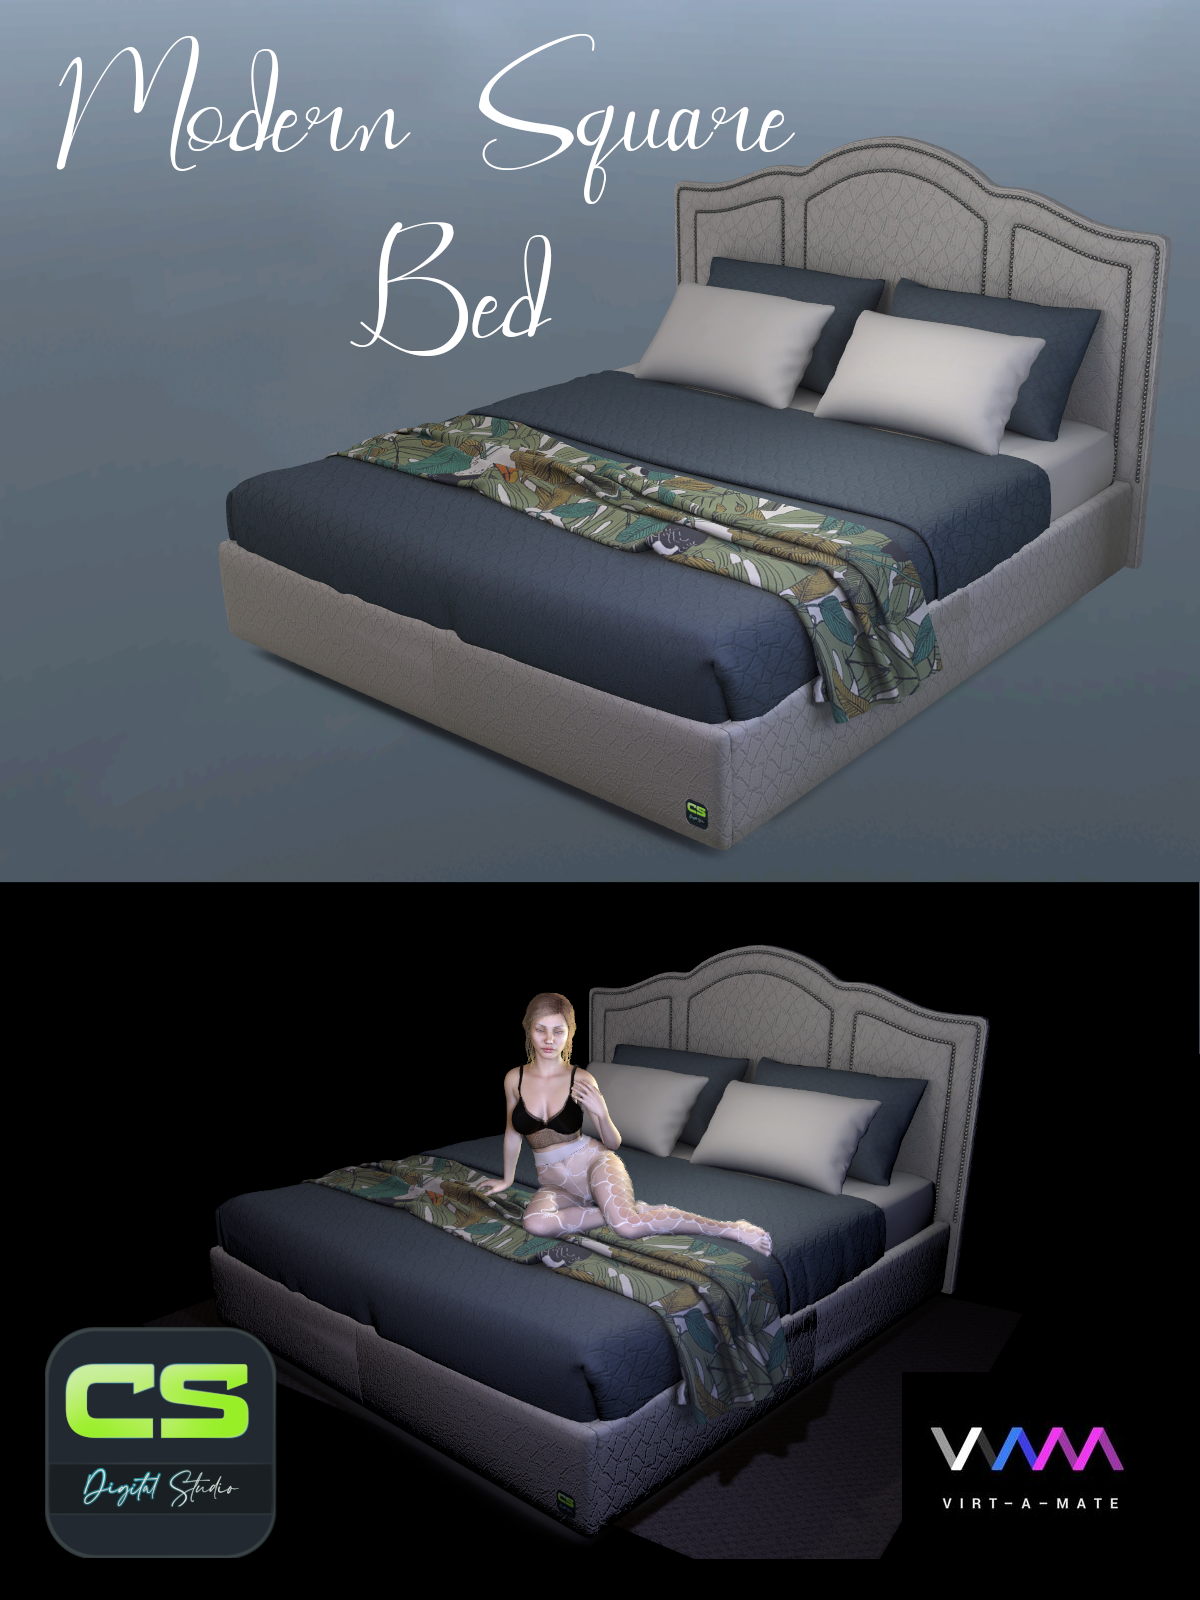 Virt-a-mate-modern-square-bed.png